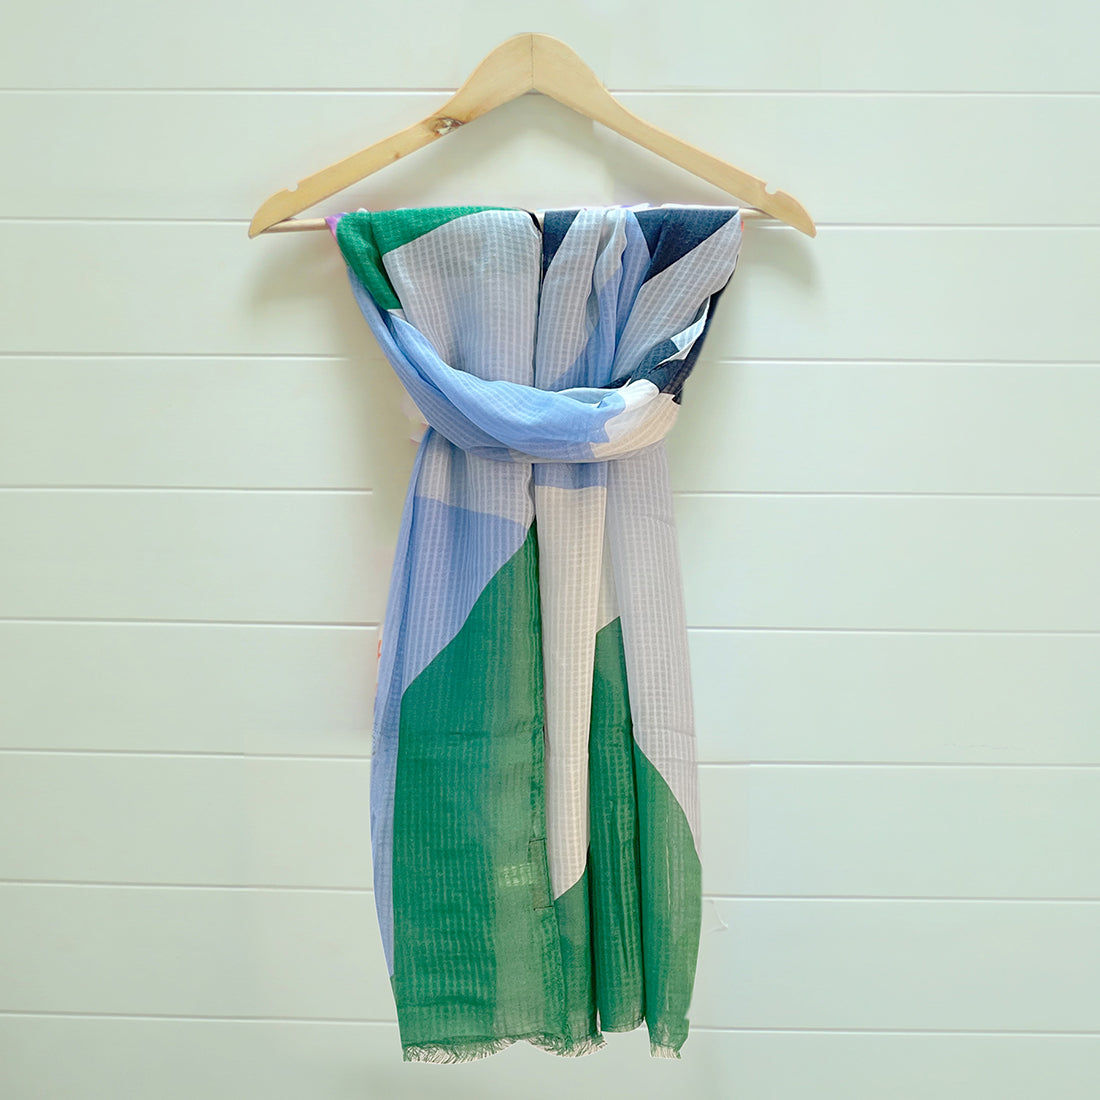 CONTEMPORARY ABSTRACT PRINTED BLUE, GREEN & WHITE VISCOSE SCARF